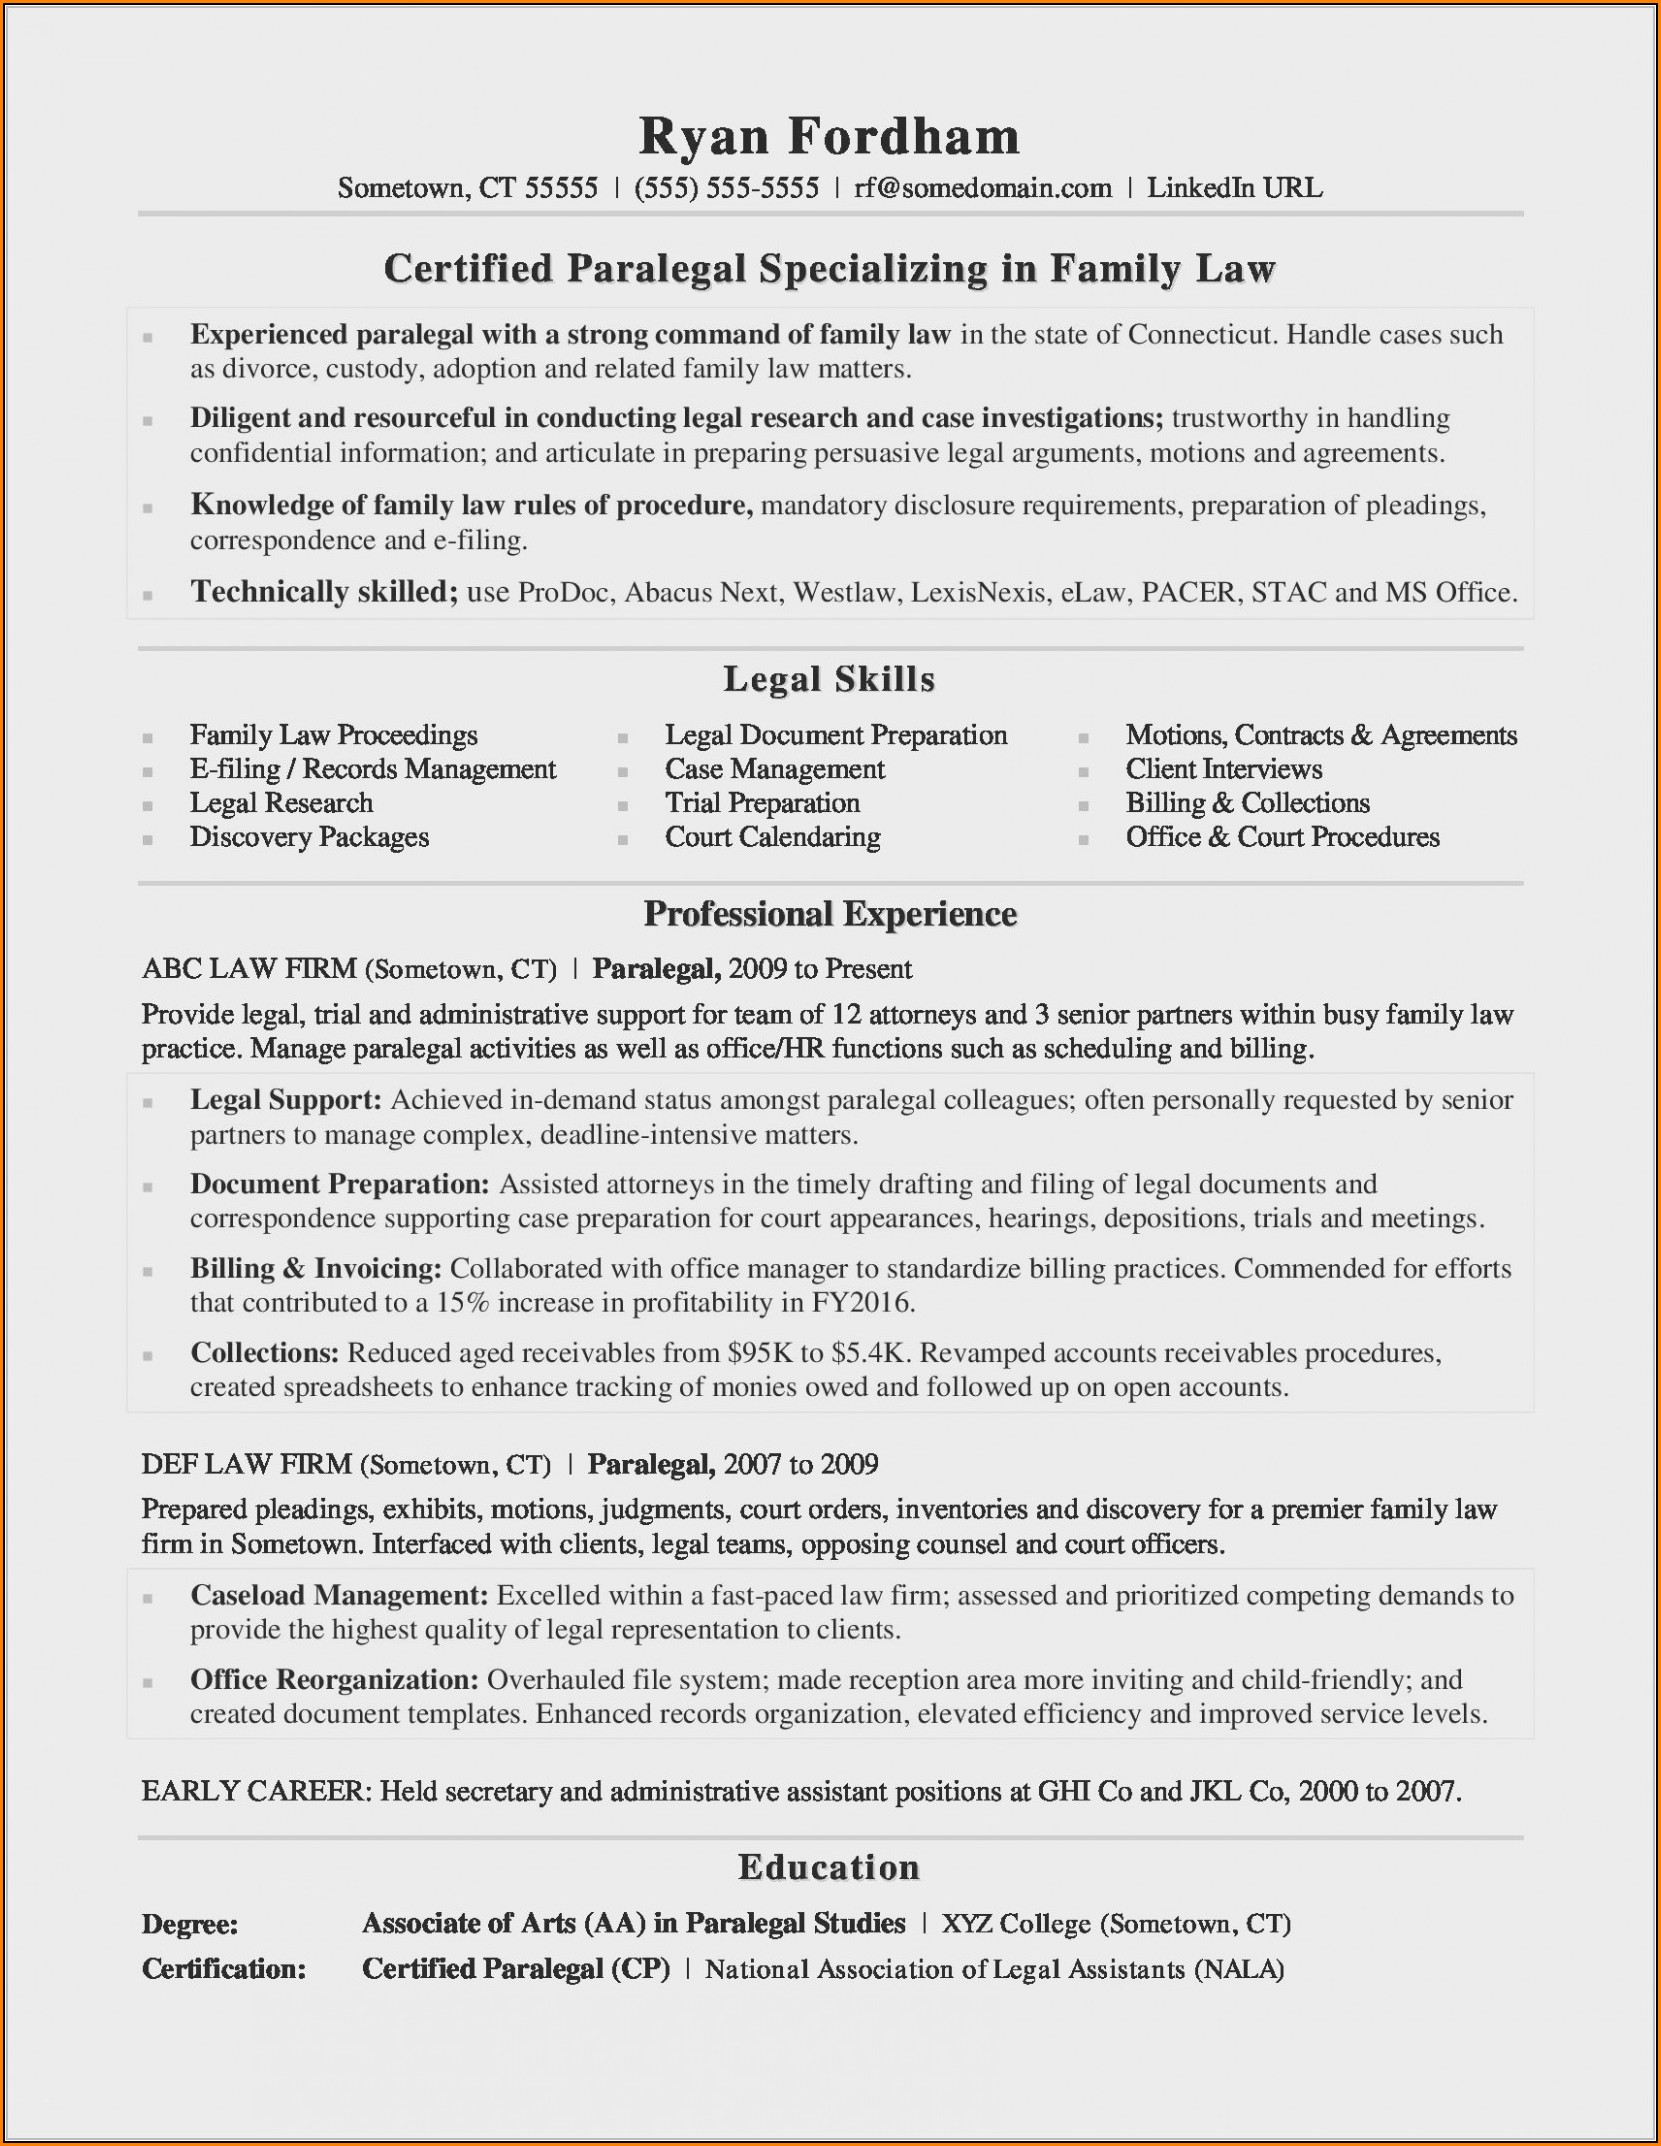 Resume Services Ct Resume Resume Examples l6YNNmlY3z